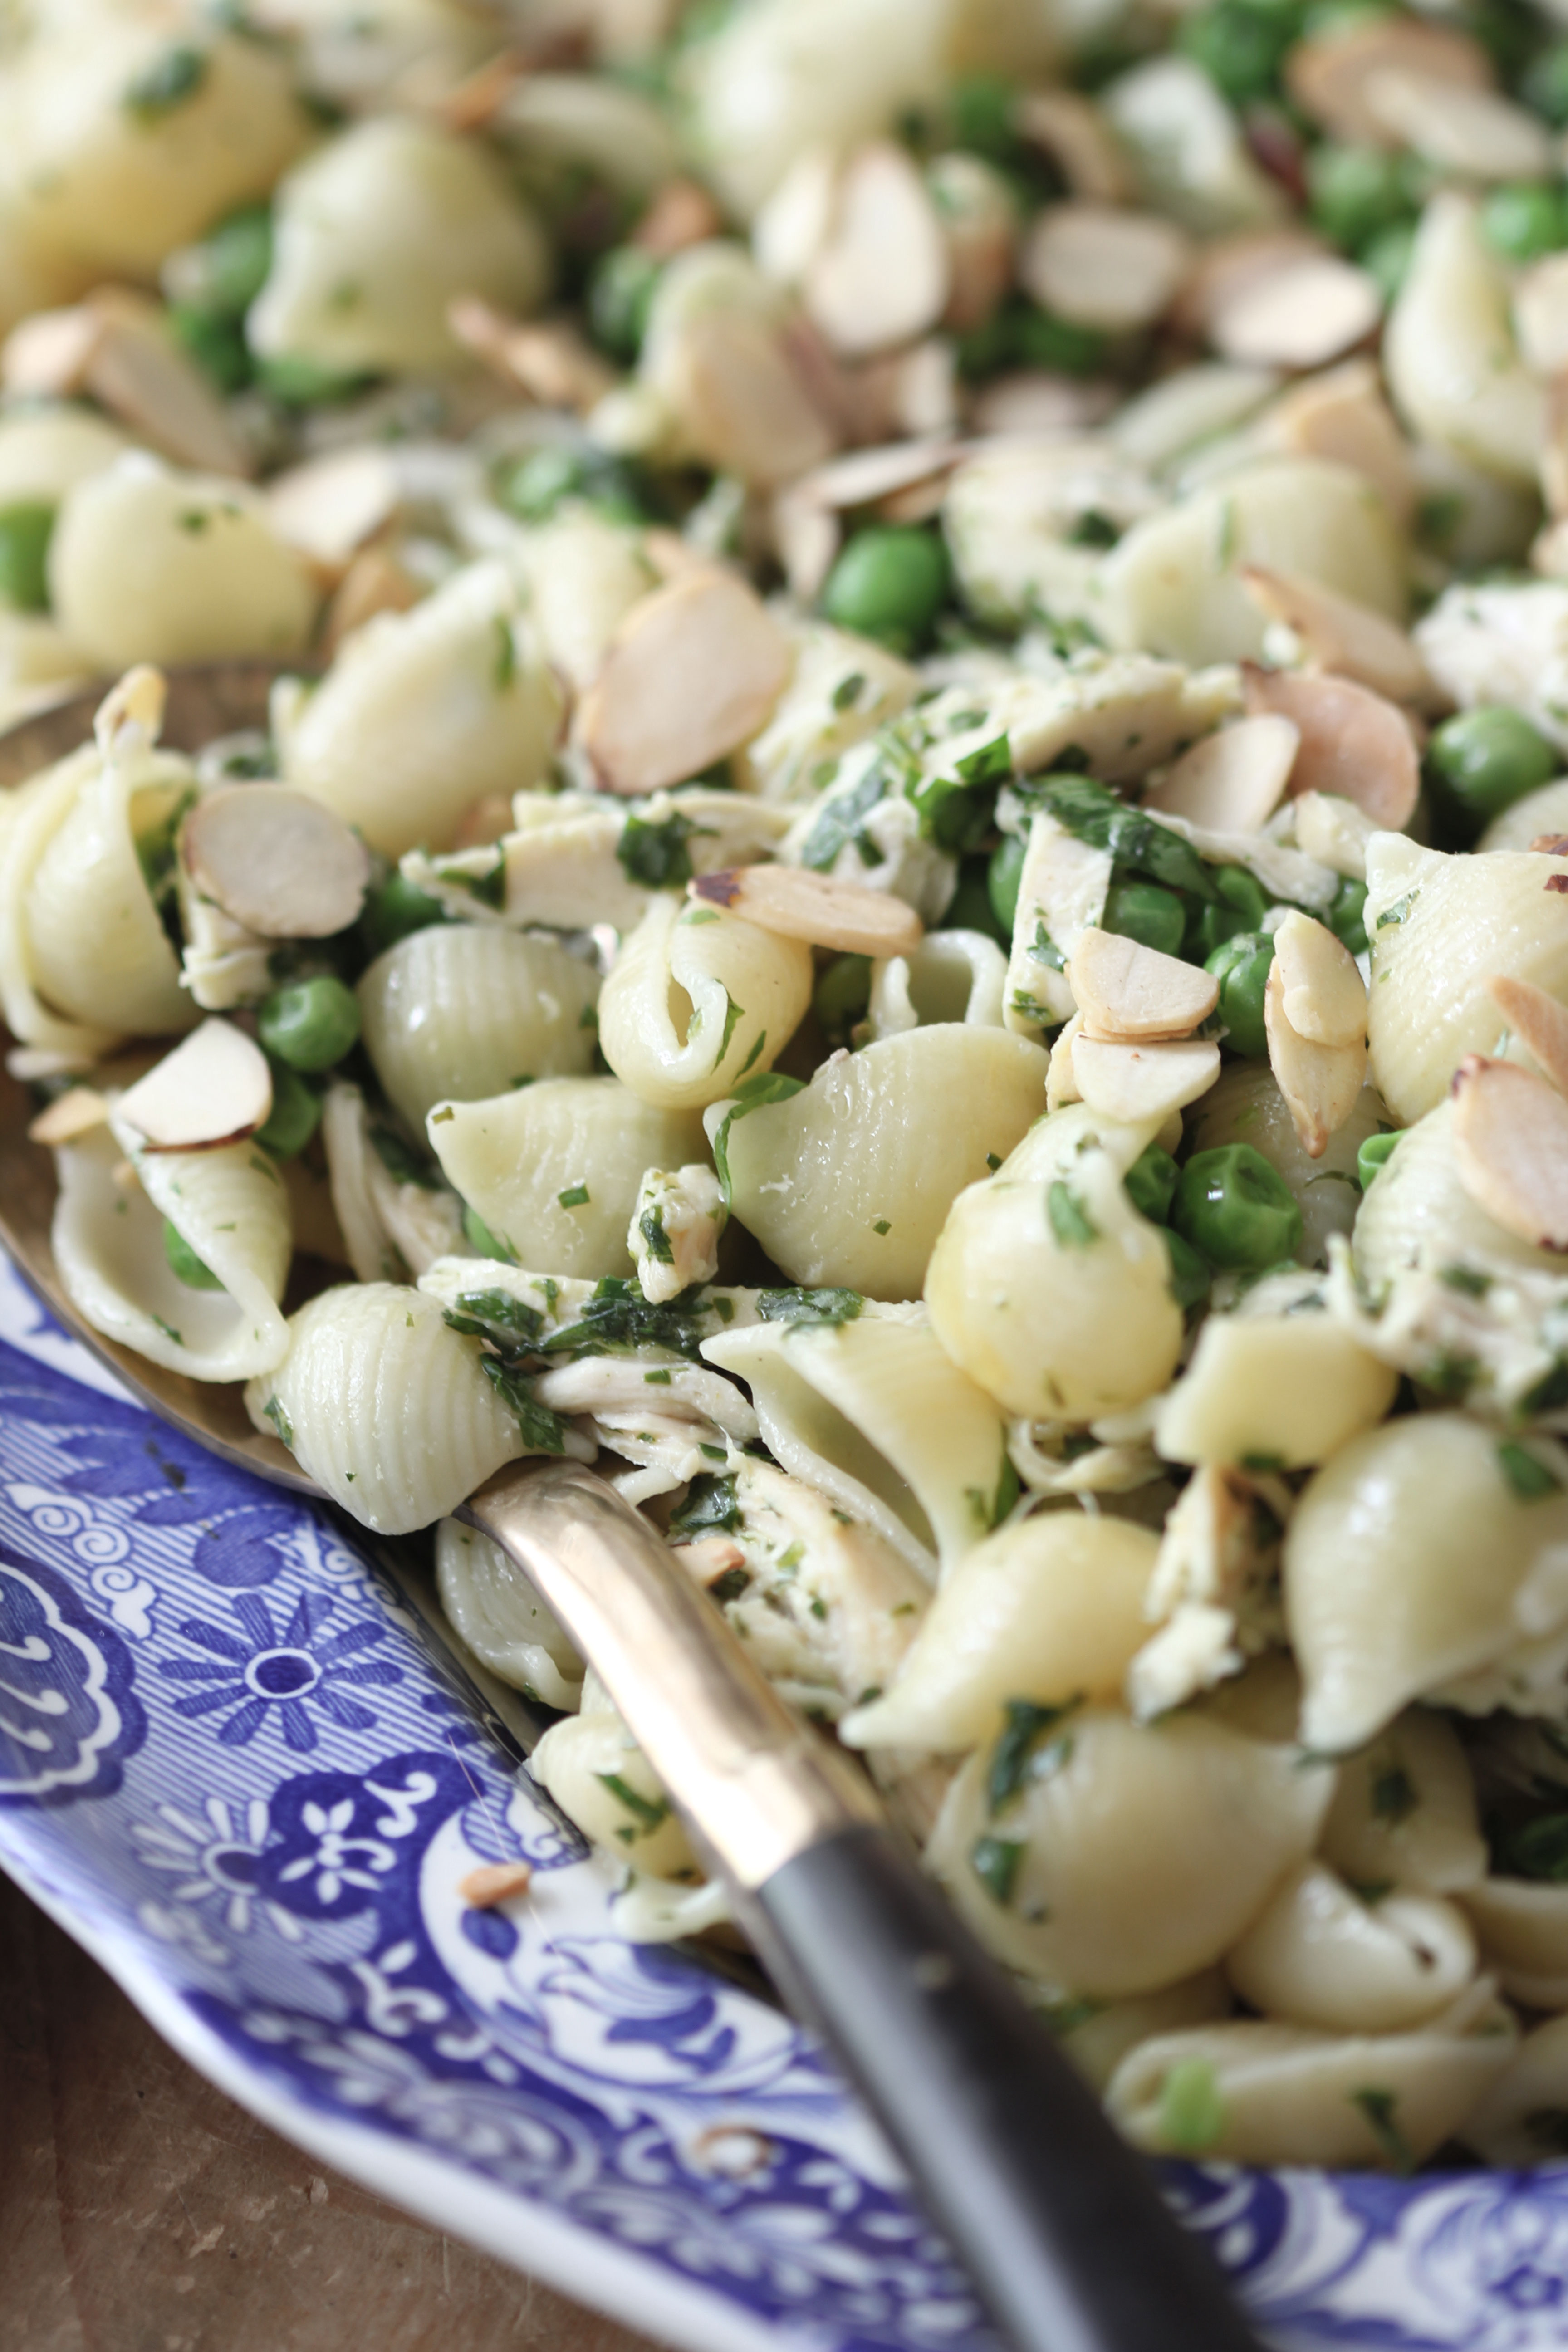 Ridgely Brode beats the heat with this yummy room temperature pasta with chicken, peas and a lemon dressing on her blog, Ridgely's Radar.